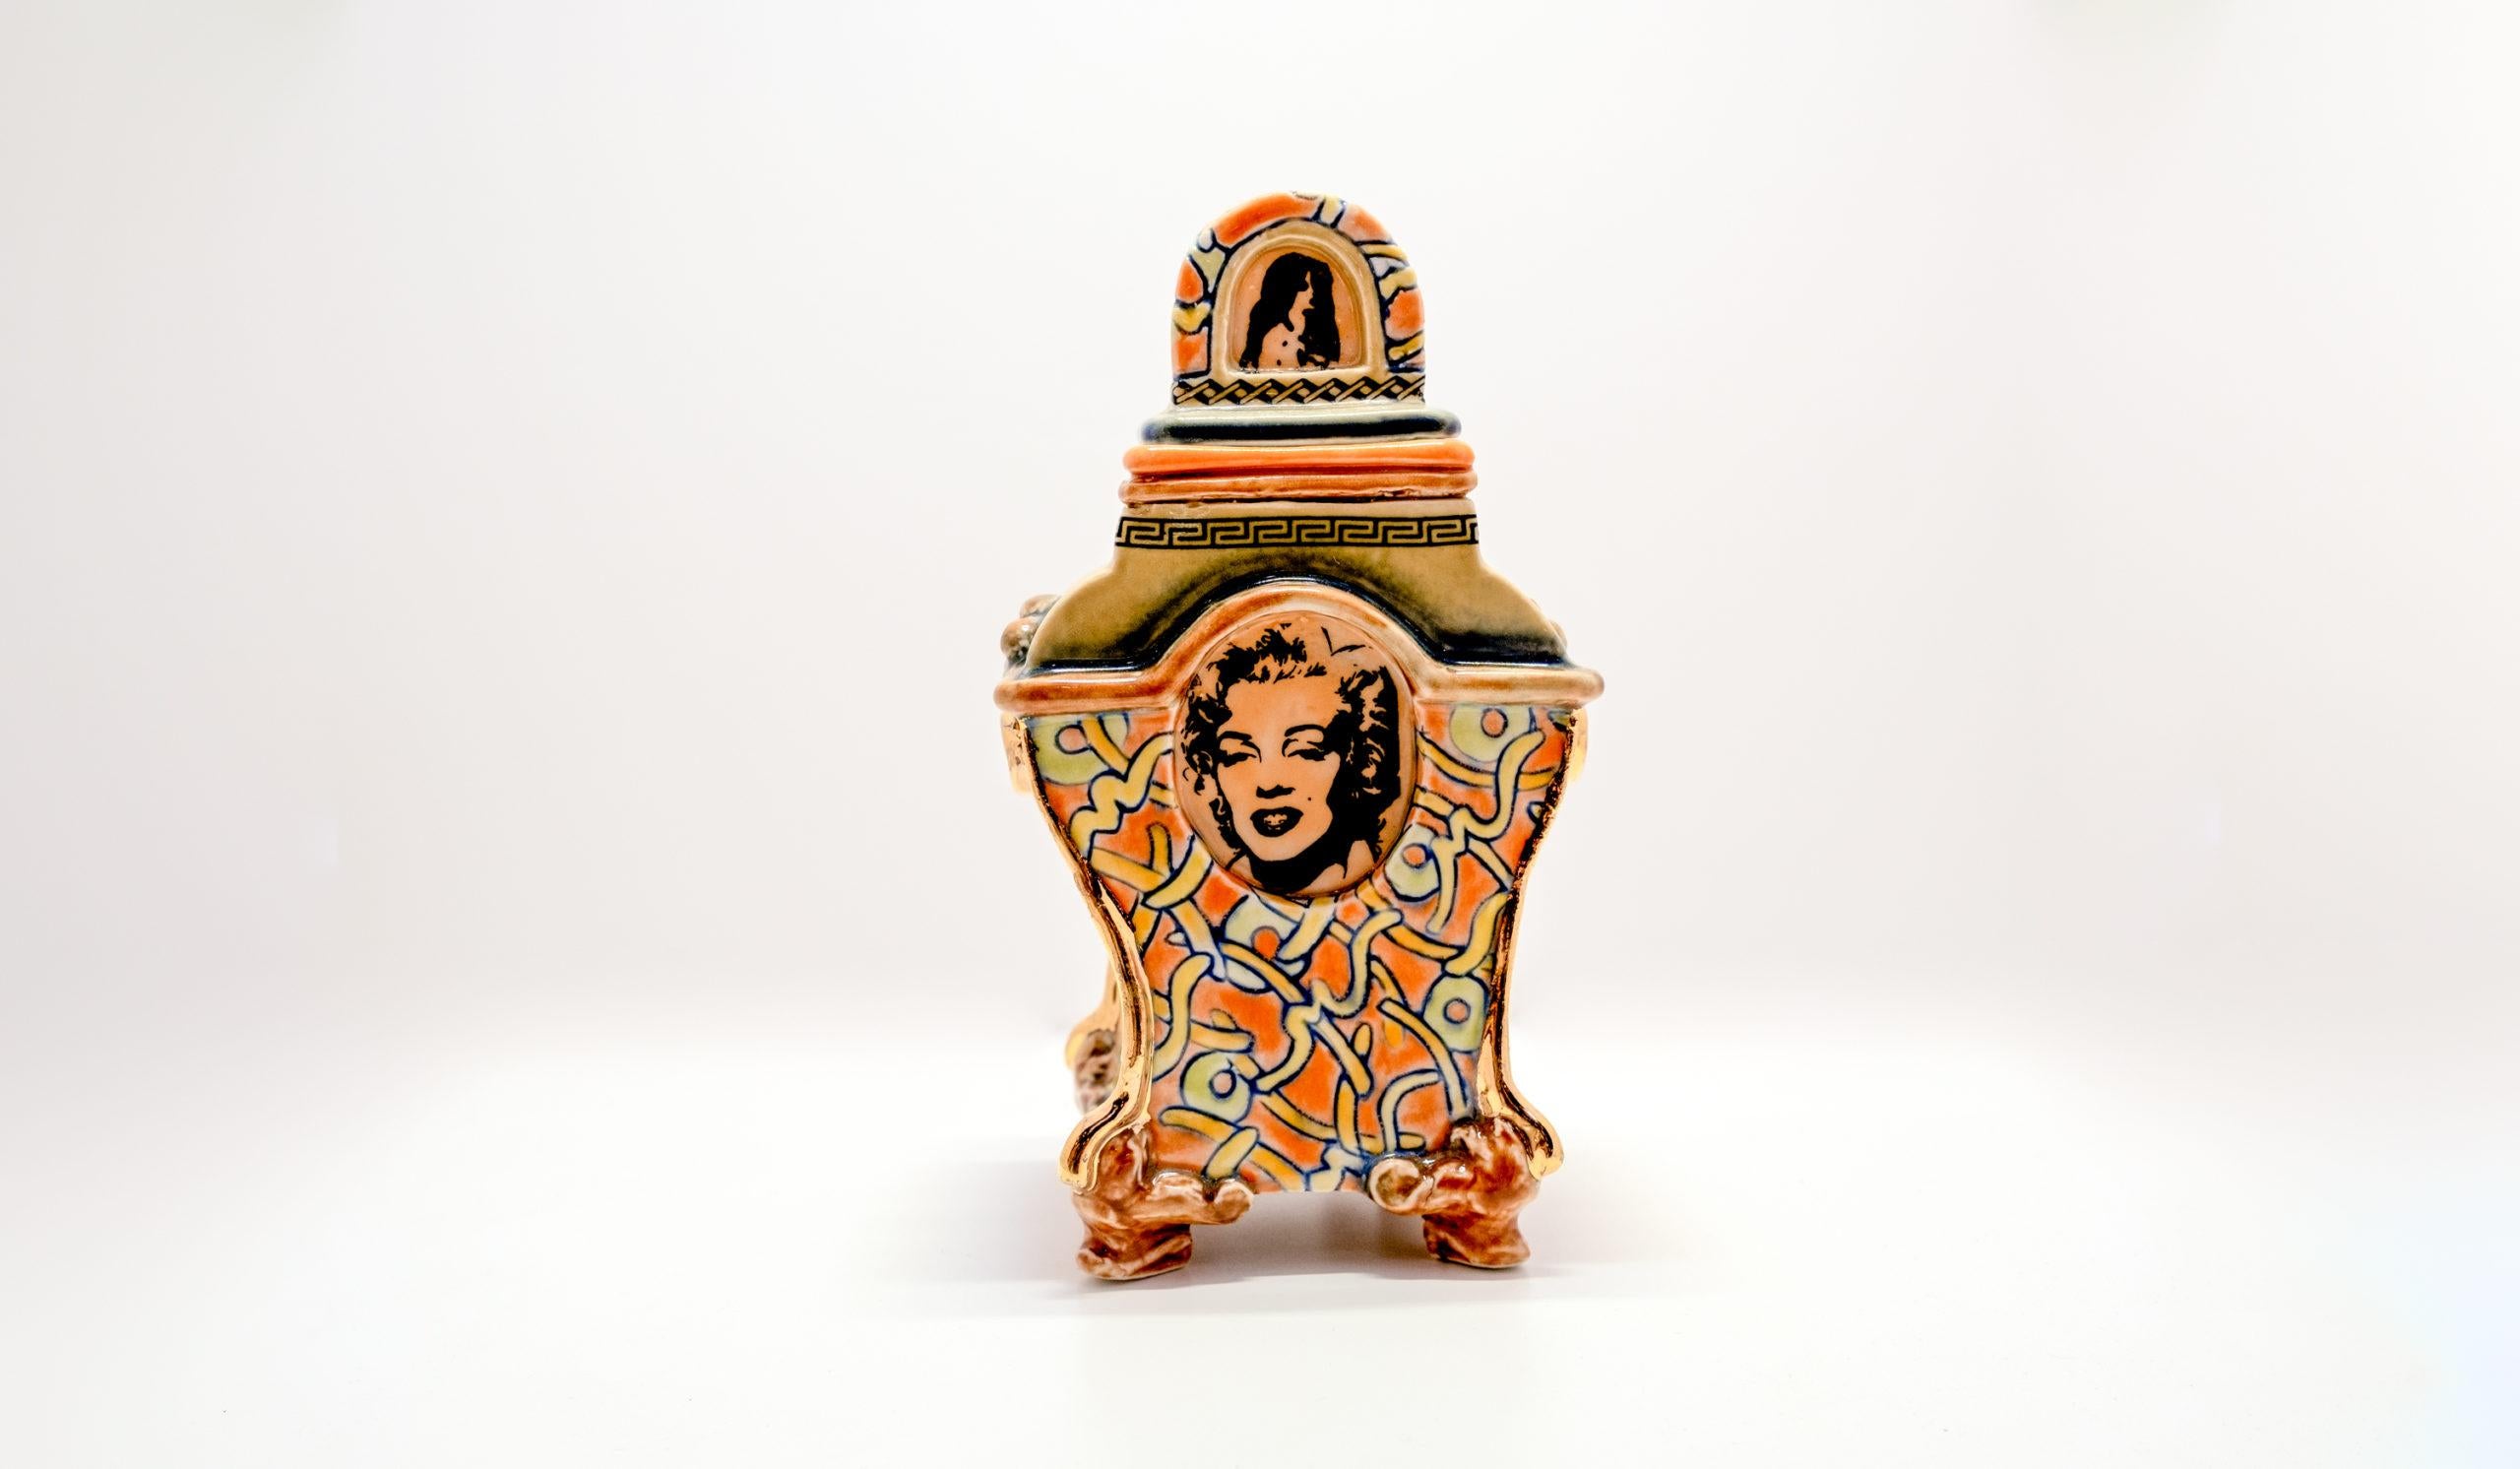 This is a one of a kind original functional vessel by local San Diego artist, Ron Carlson. This lidded container depicts American pop culture icon Marilyn Monroe. This ceramic vessel is orange with green tones and is 6.5 inches tall. A certificate